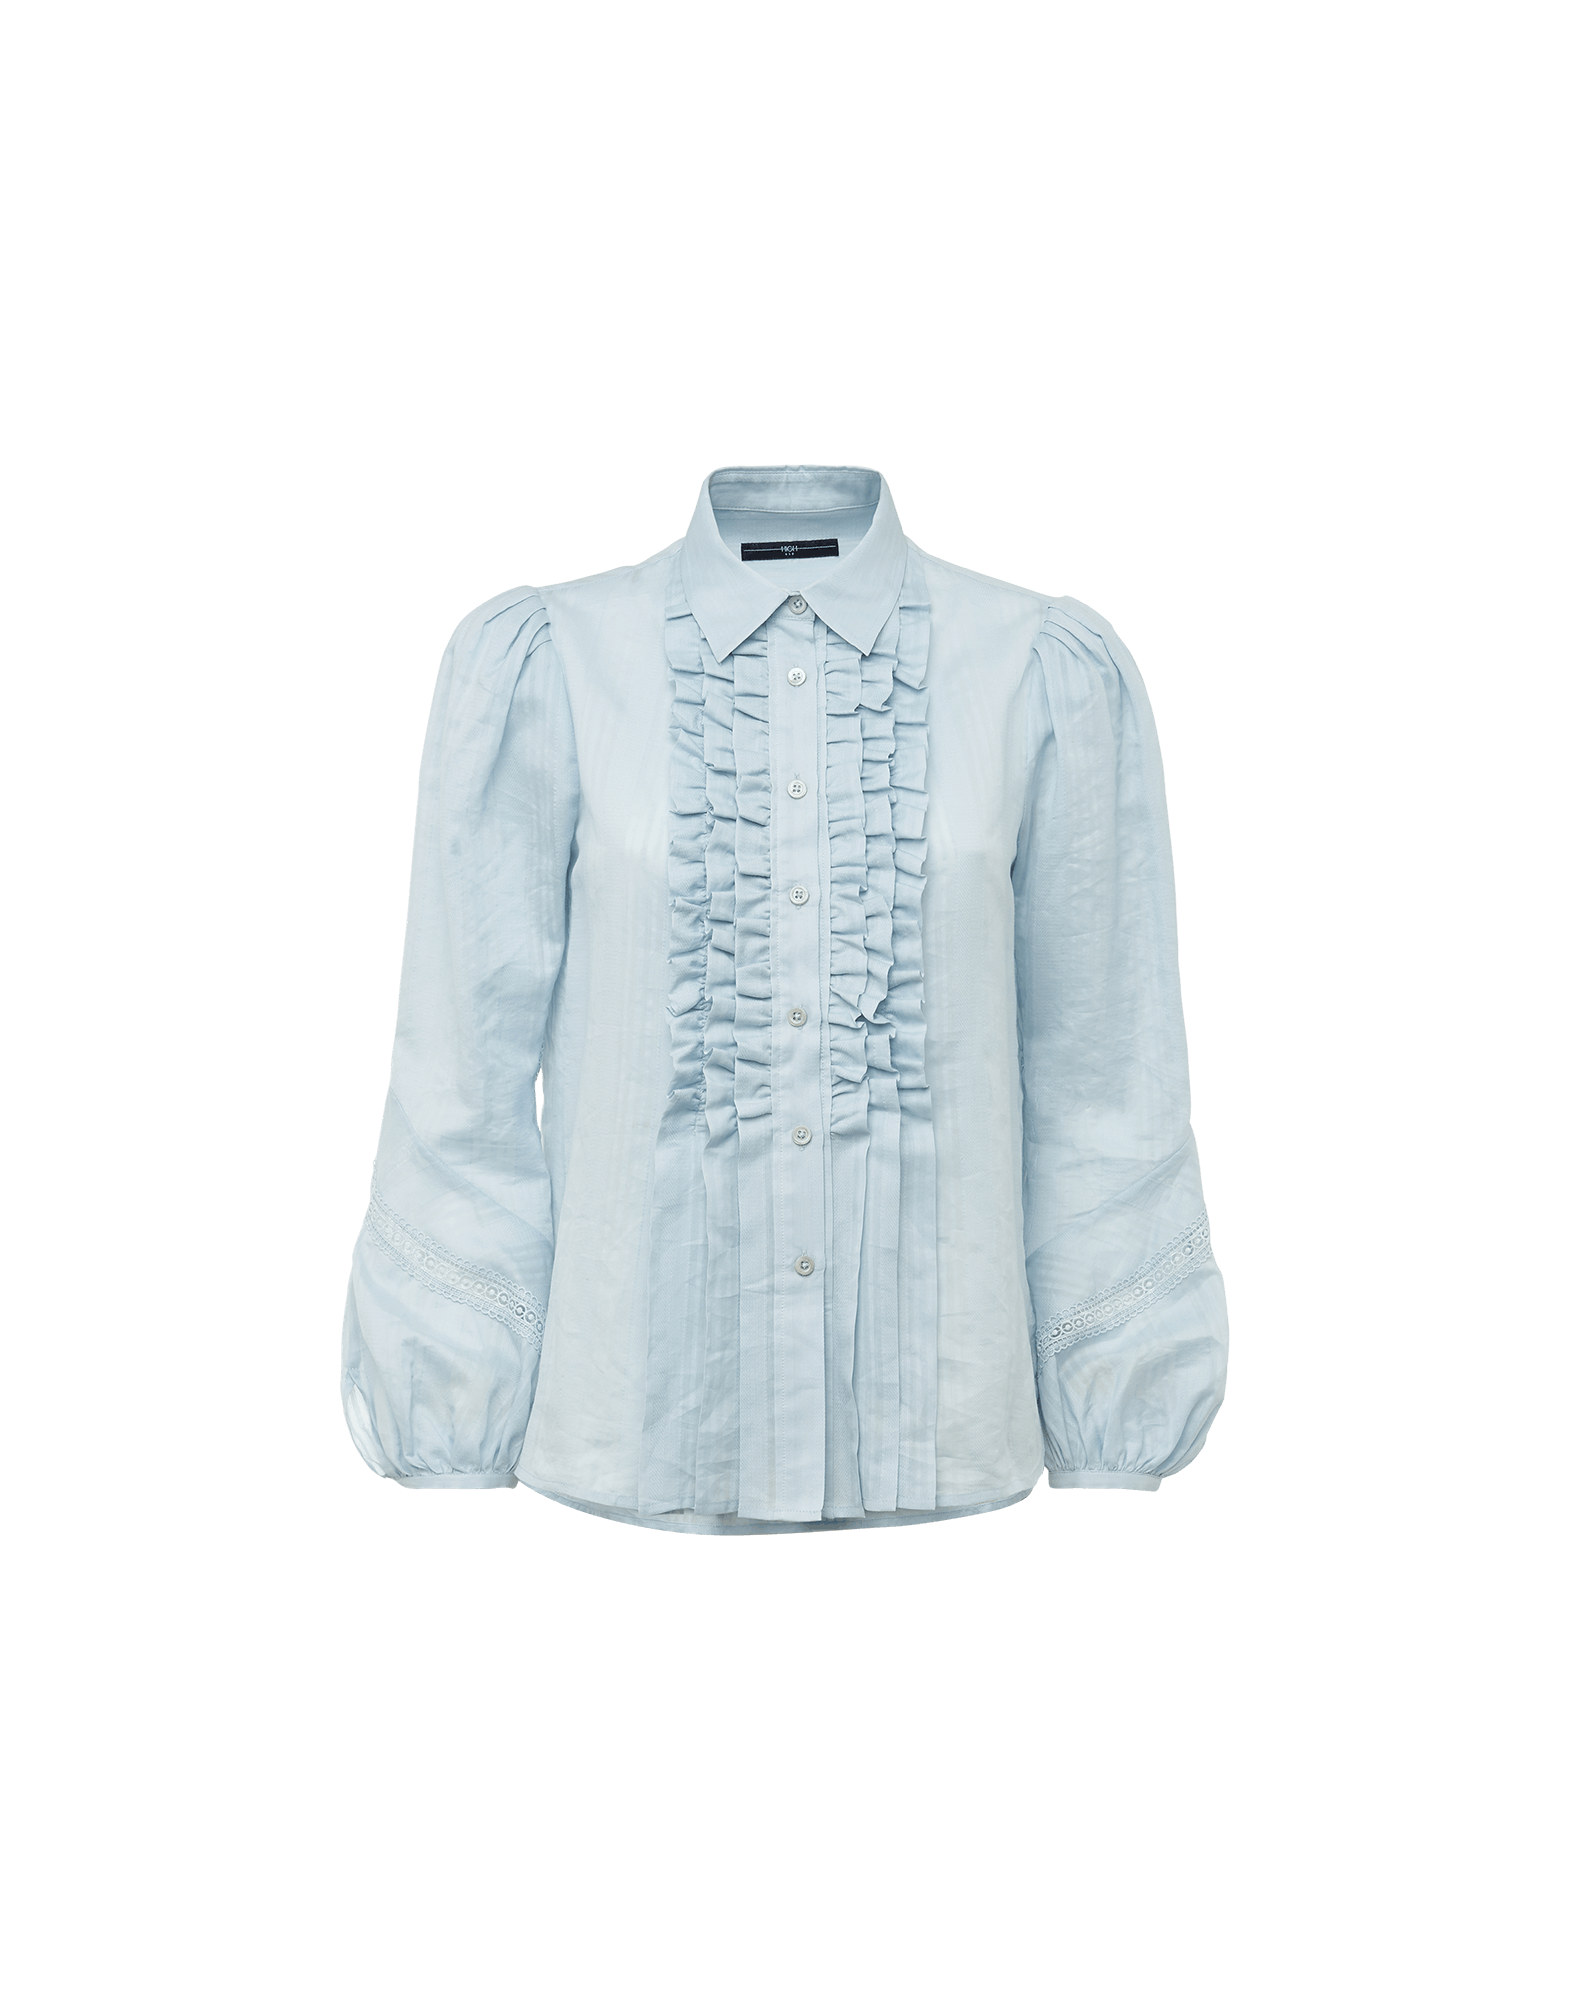 NOTIFY: Pale blue with bell sleeves front shirt ruffle